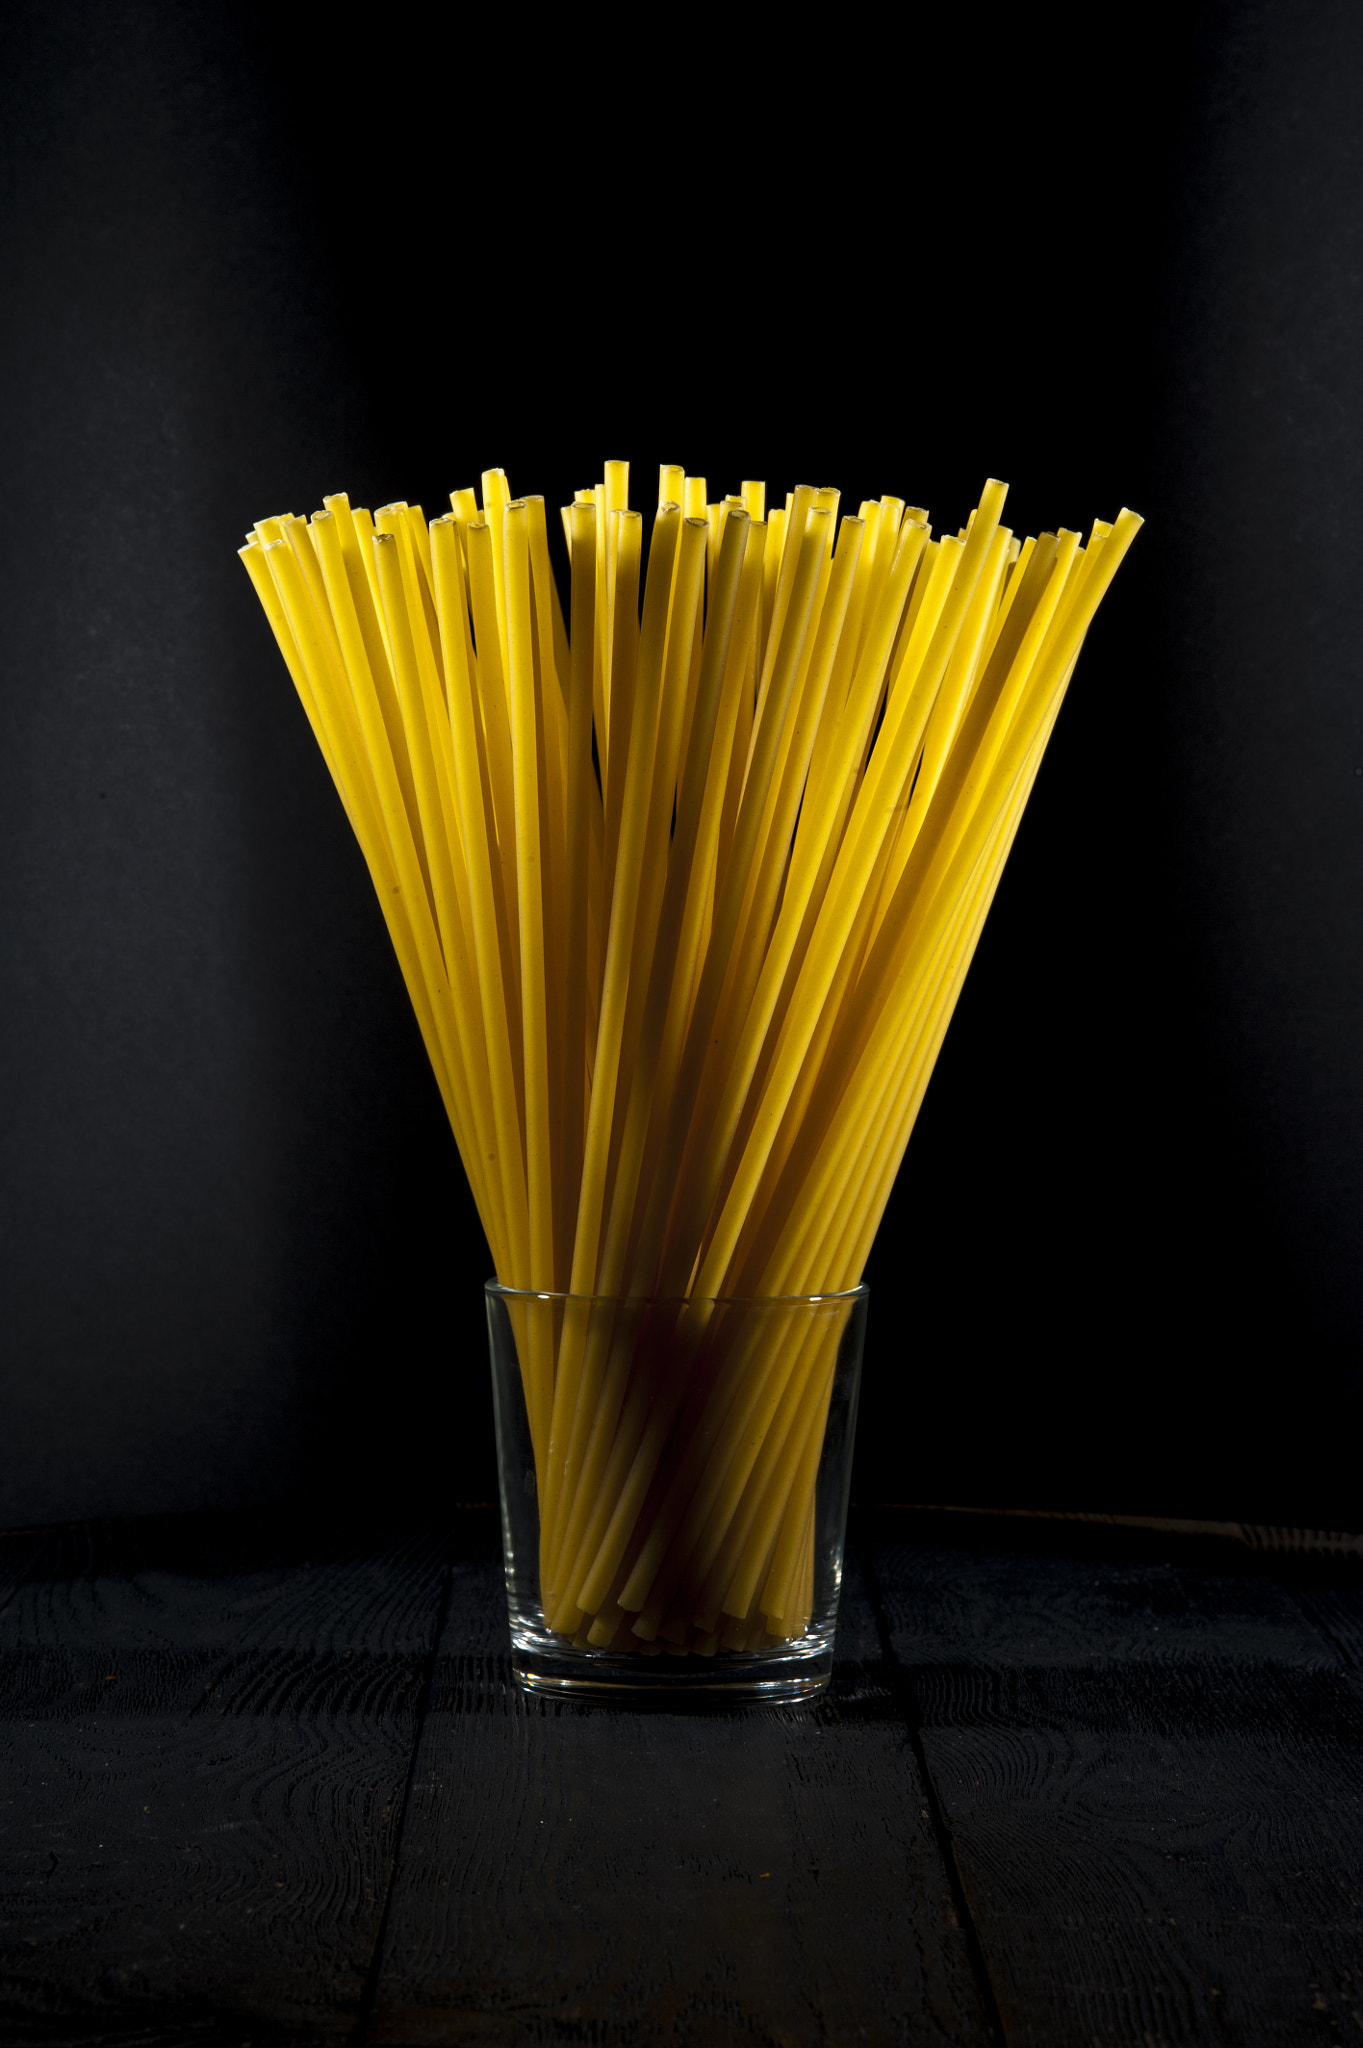 Nikon D700 + AF Micro-Nikkor 105mm f/2.8 sample photo. Bundle of italian pasta in glass photography